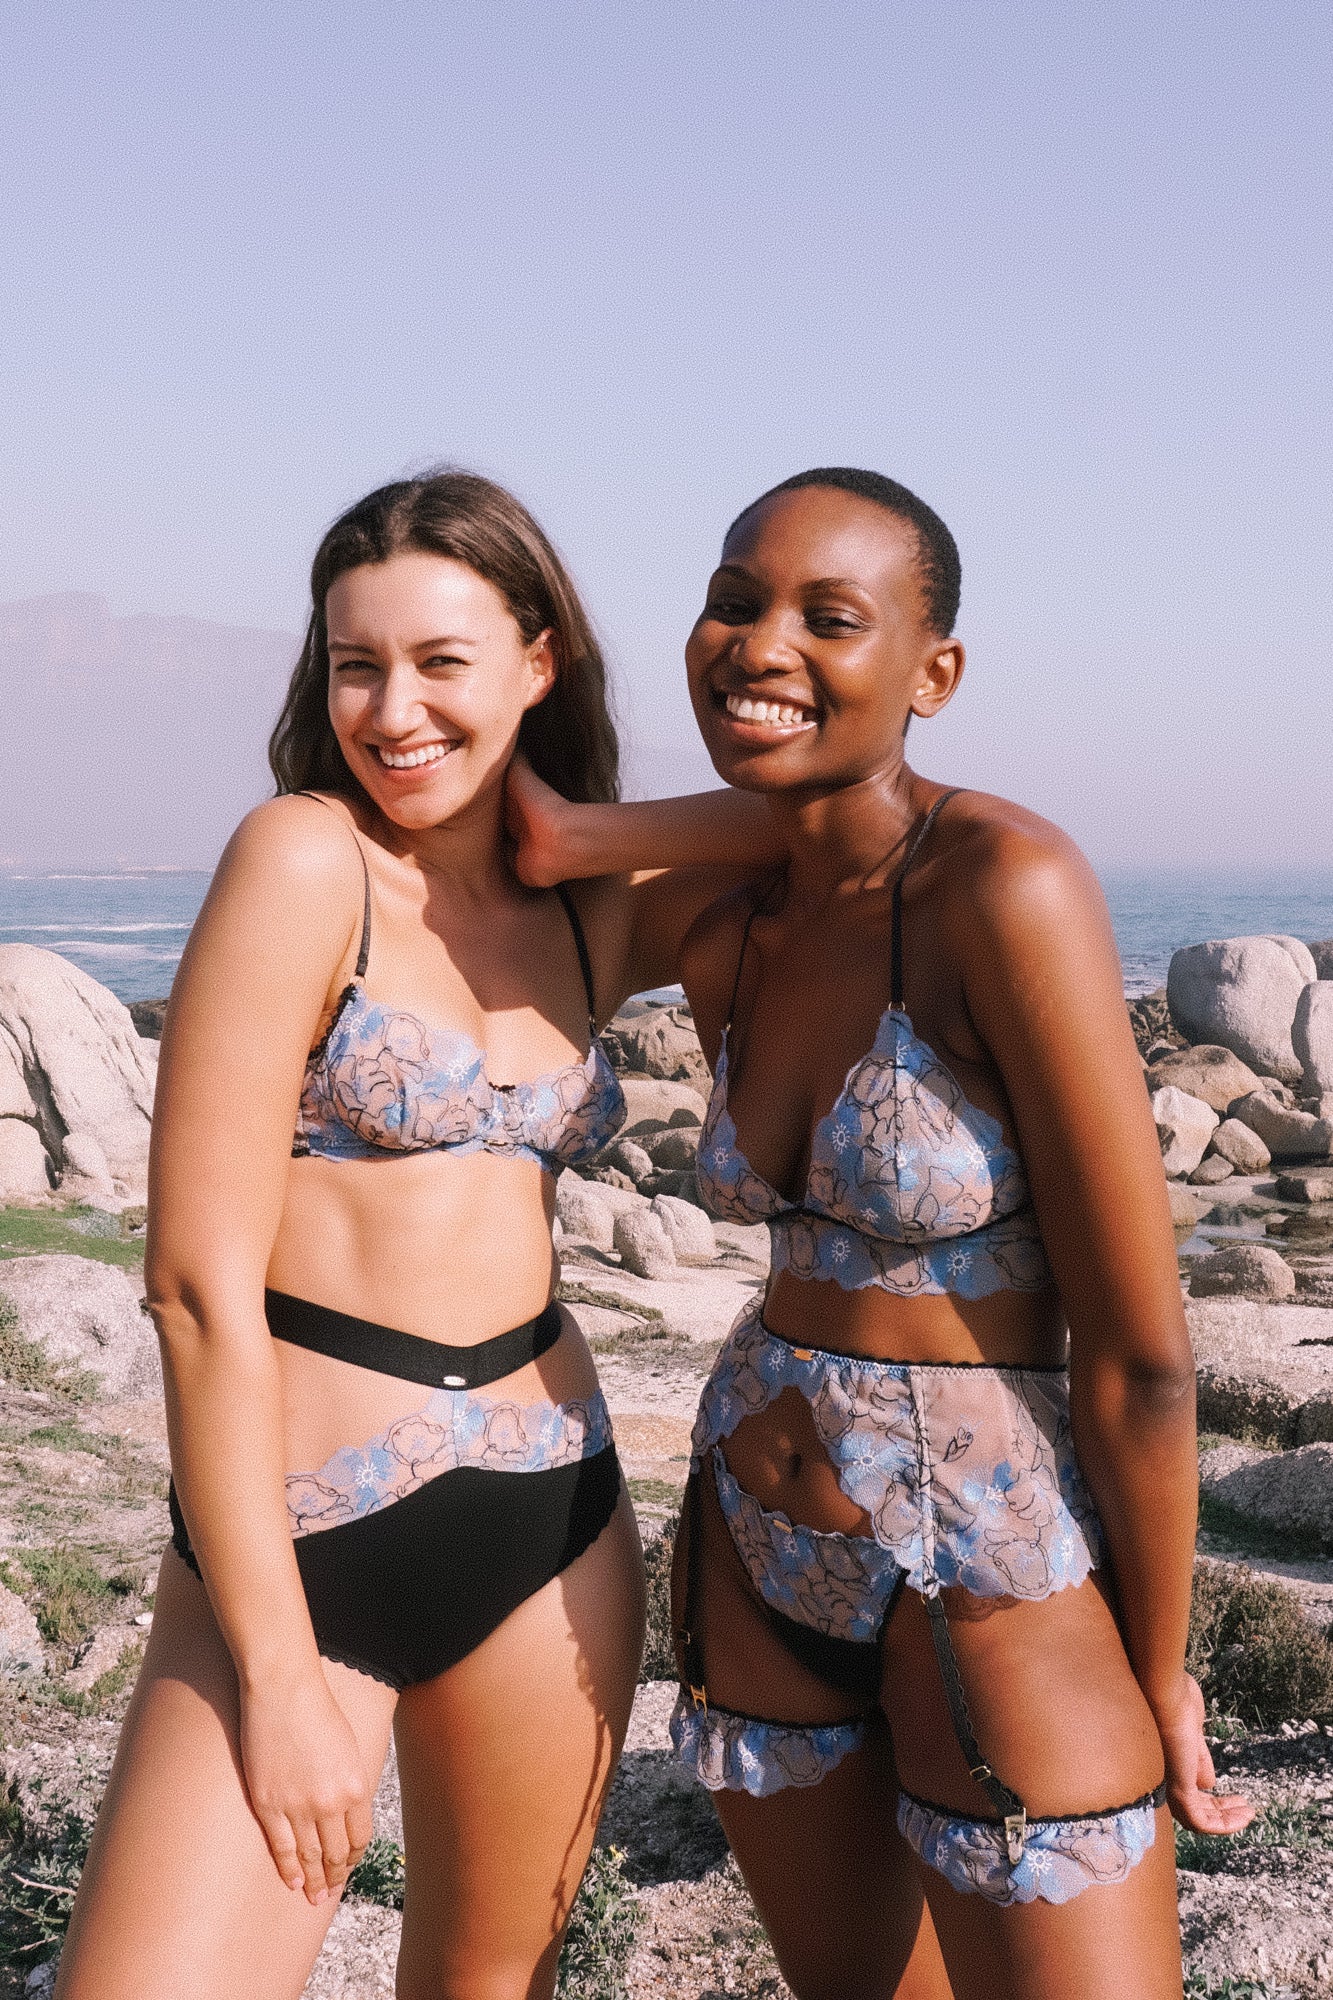 Troo -Sustainable underwear, ethically made with love